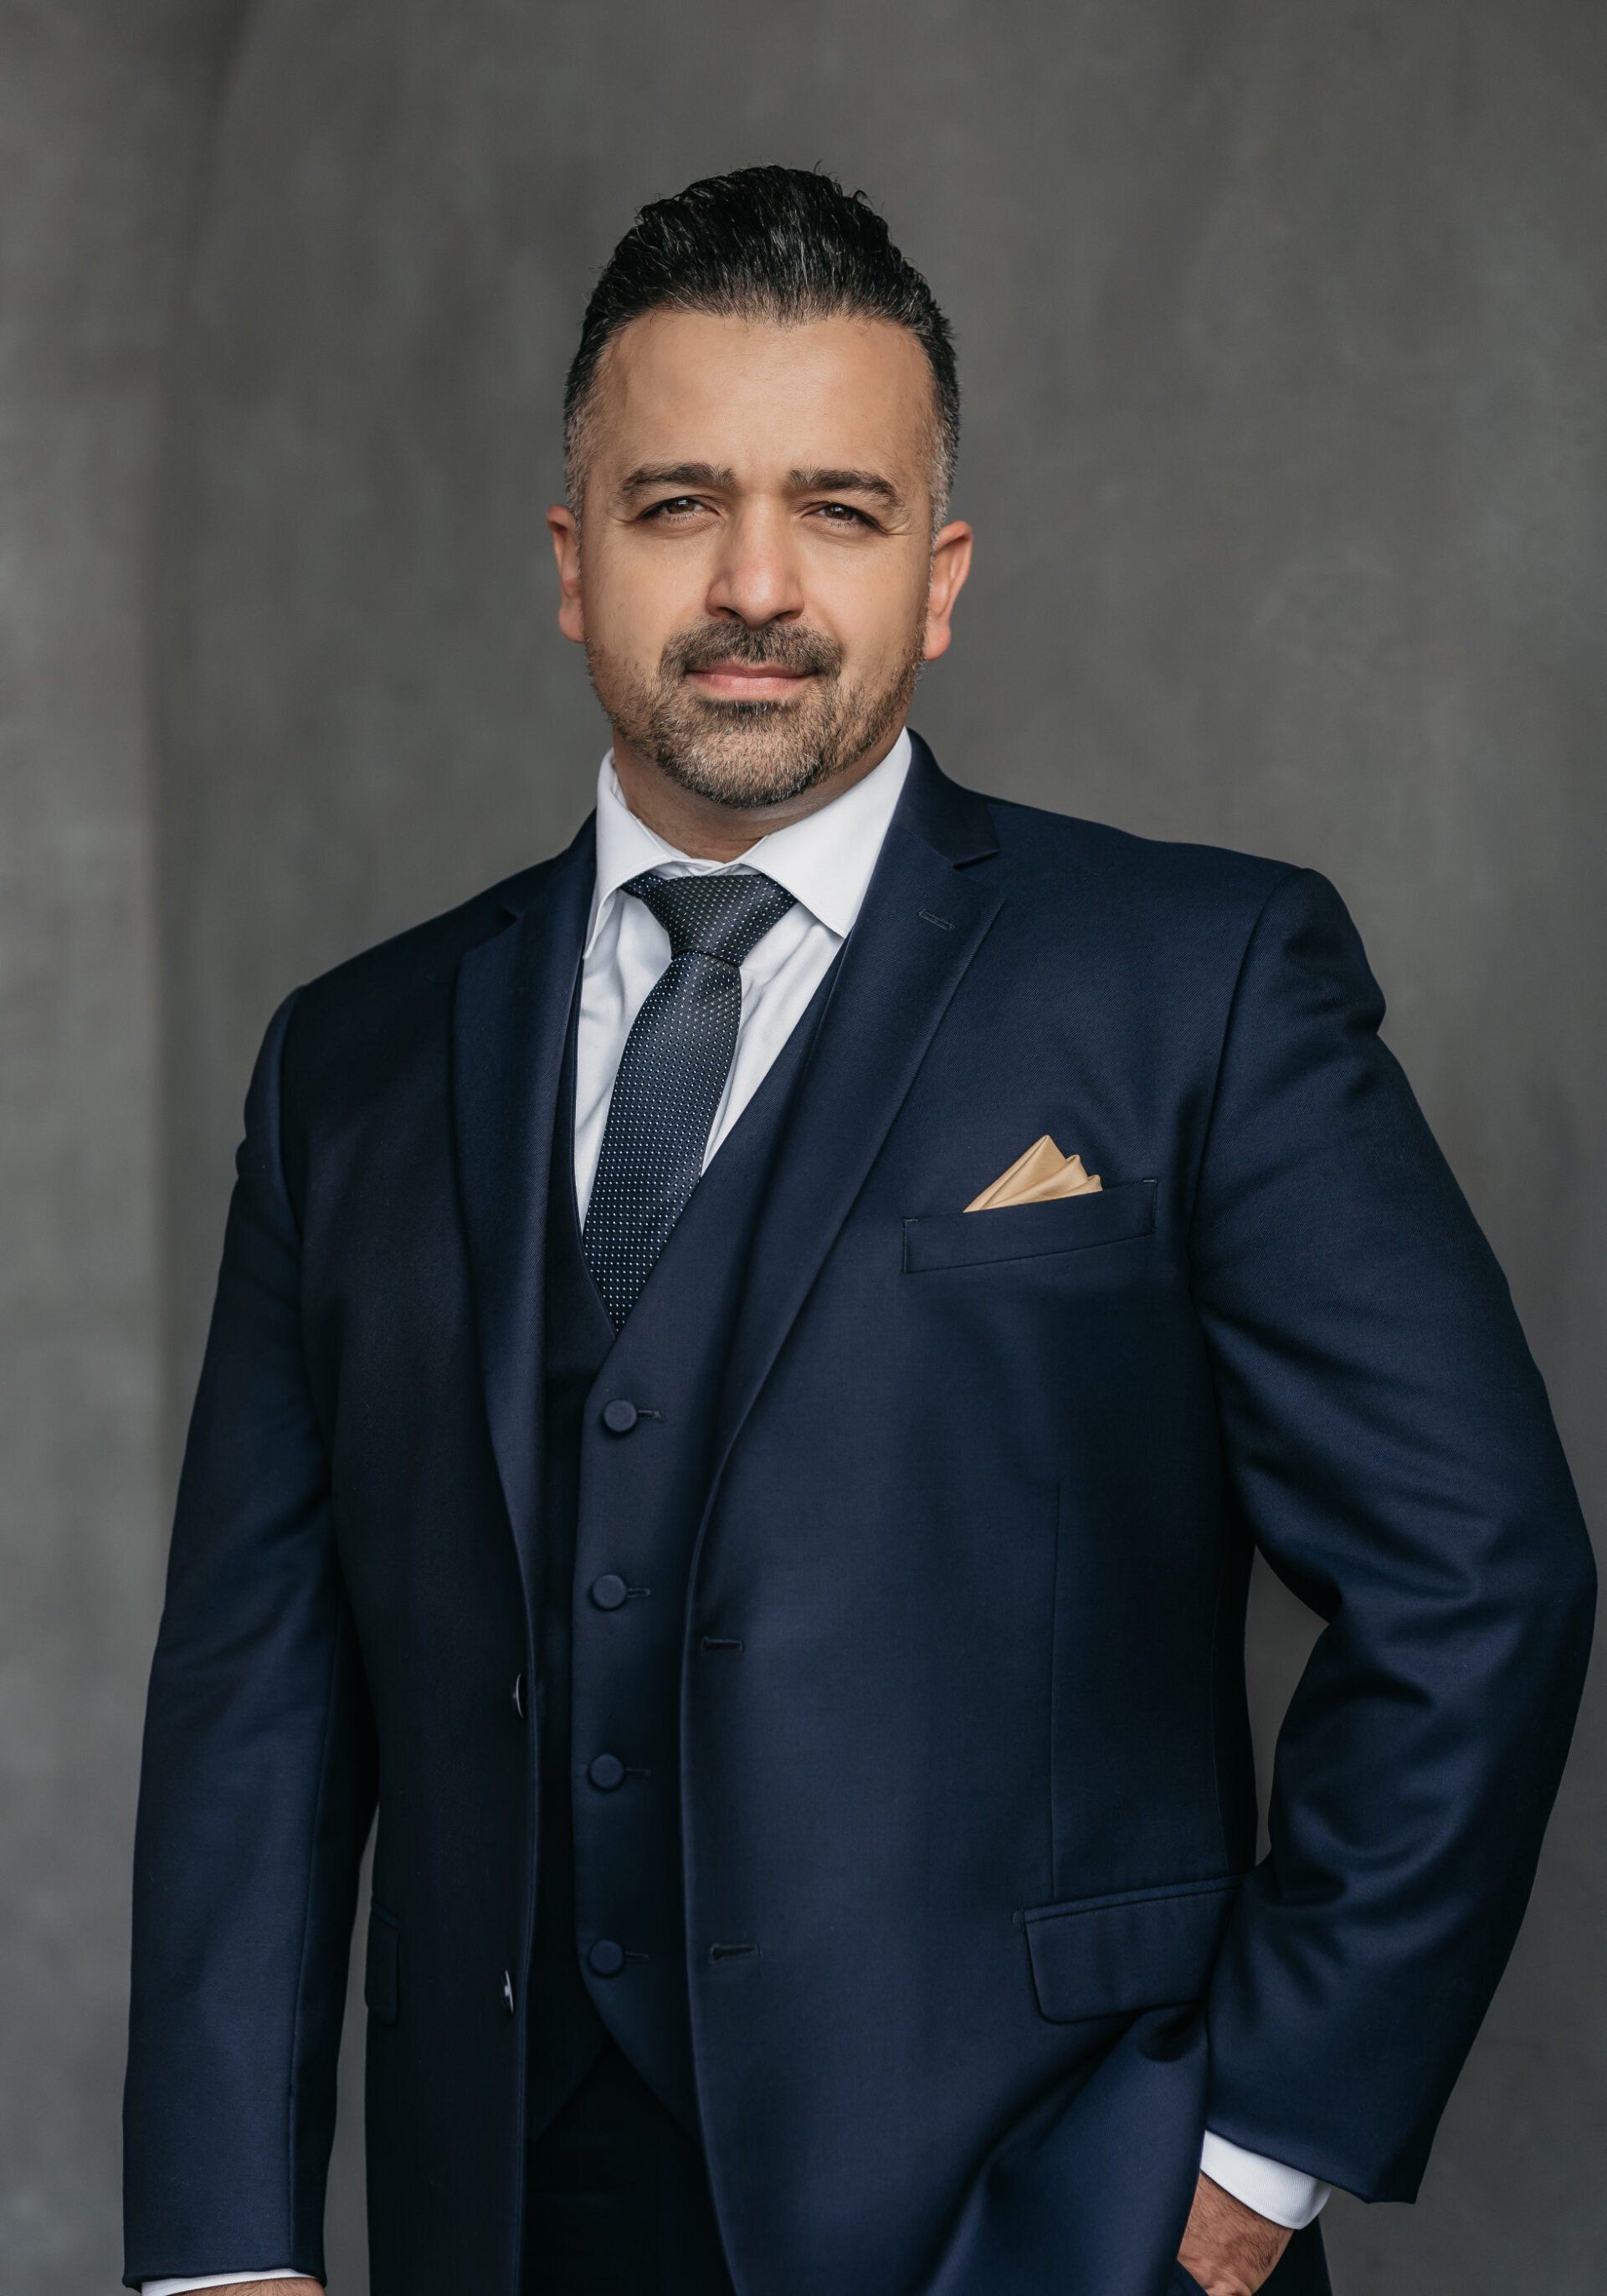 a realtor wearing a suit posing for a headshot photography